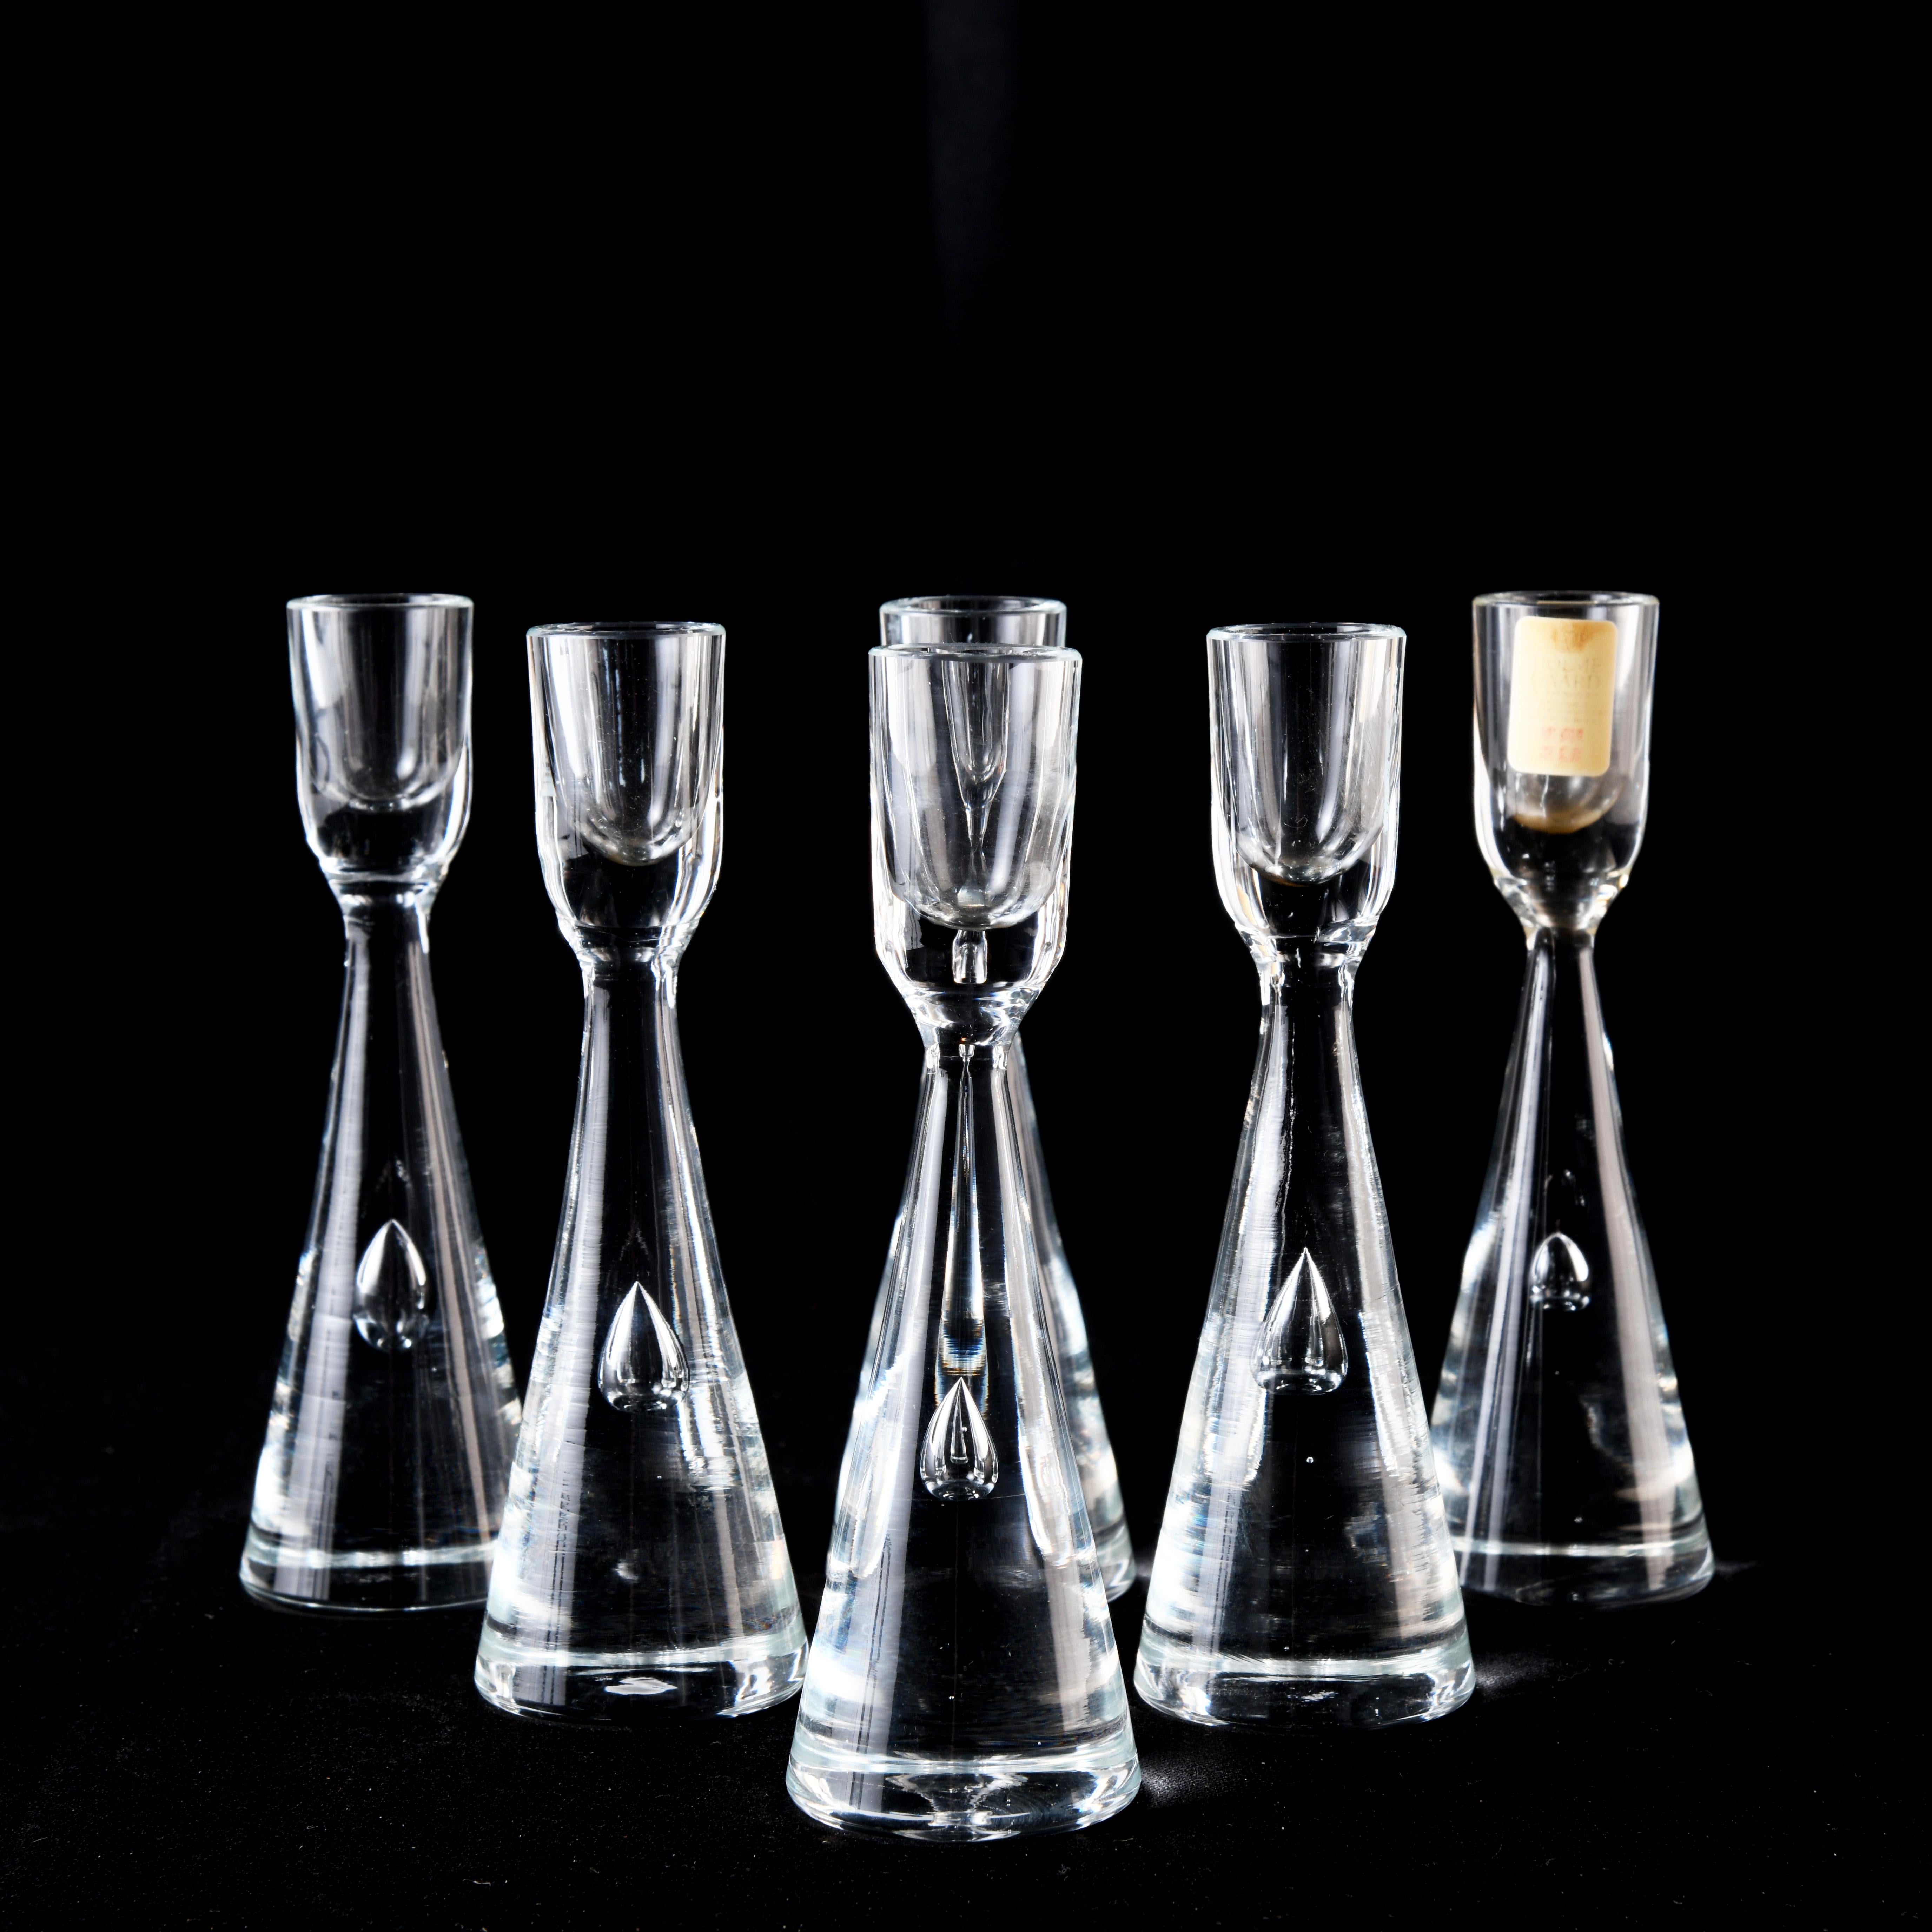 Set of six small glass candleholders (H: 12cm) with an air bubble, designed by Bent Severin (1925-2012) for the Danish glass company Holmegaard in 1957. These candleholders are part of the 